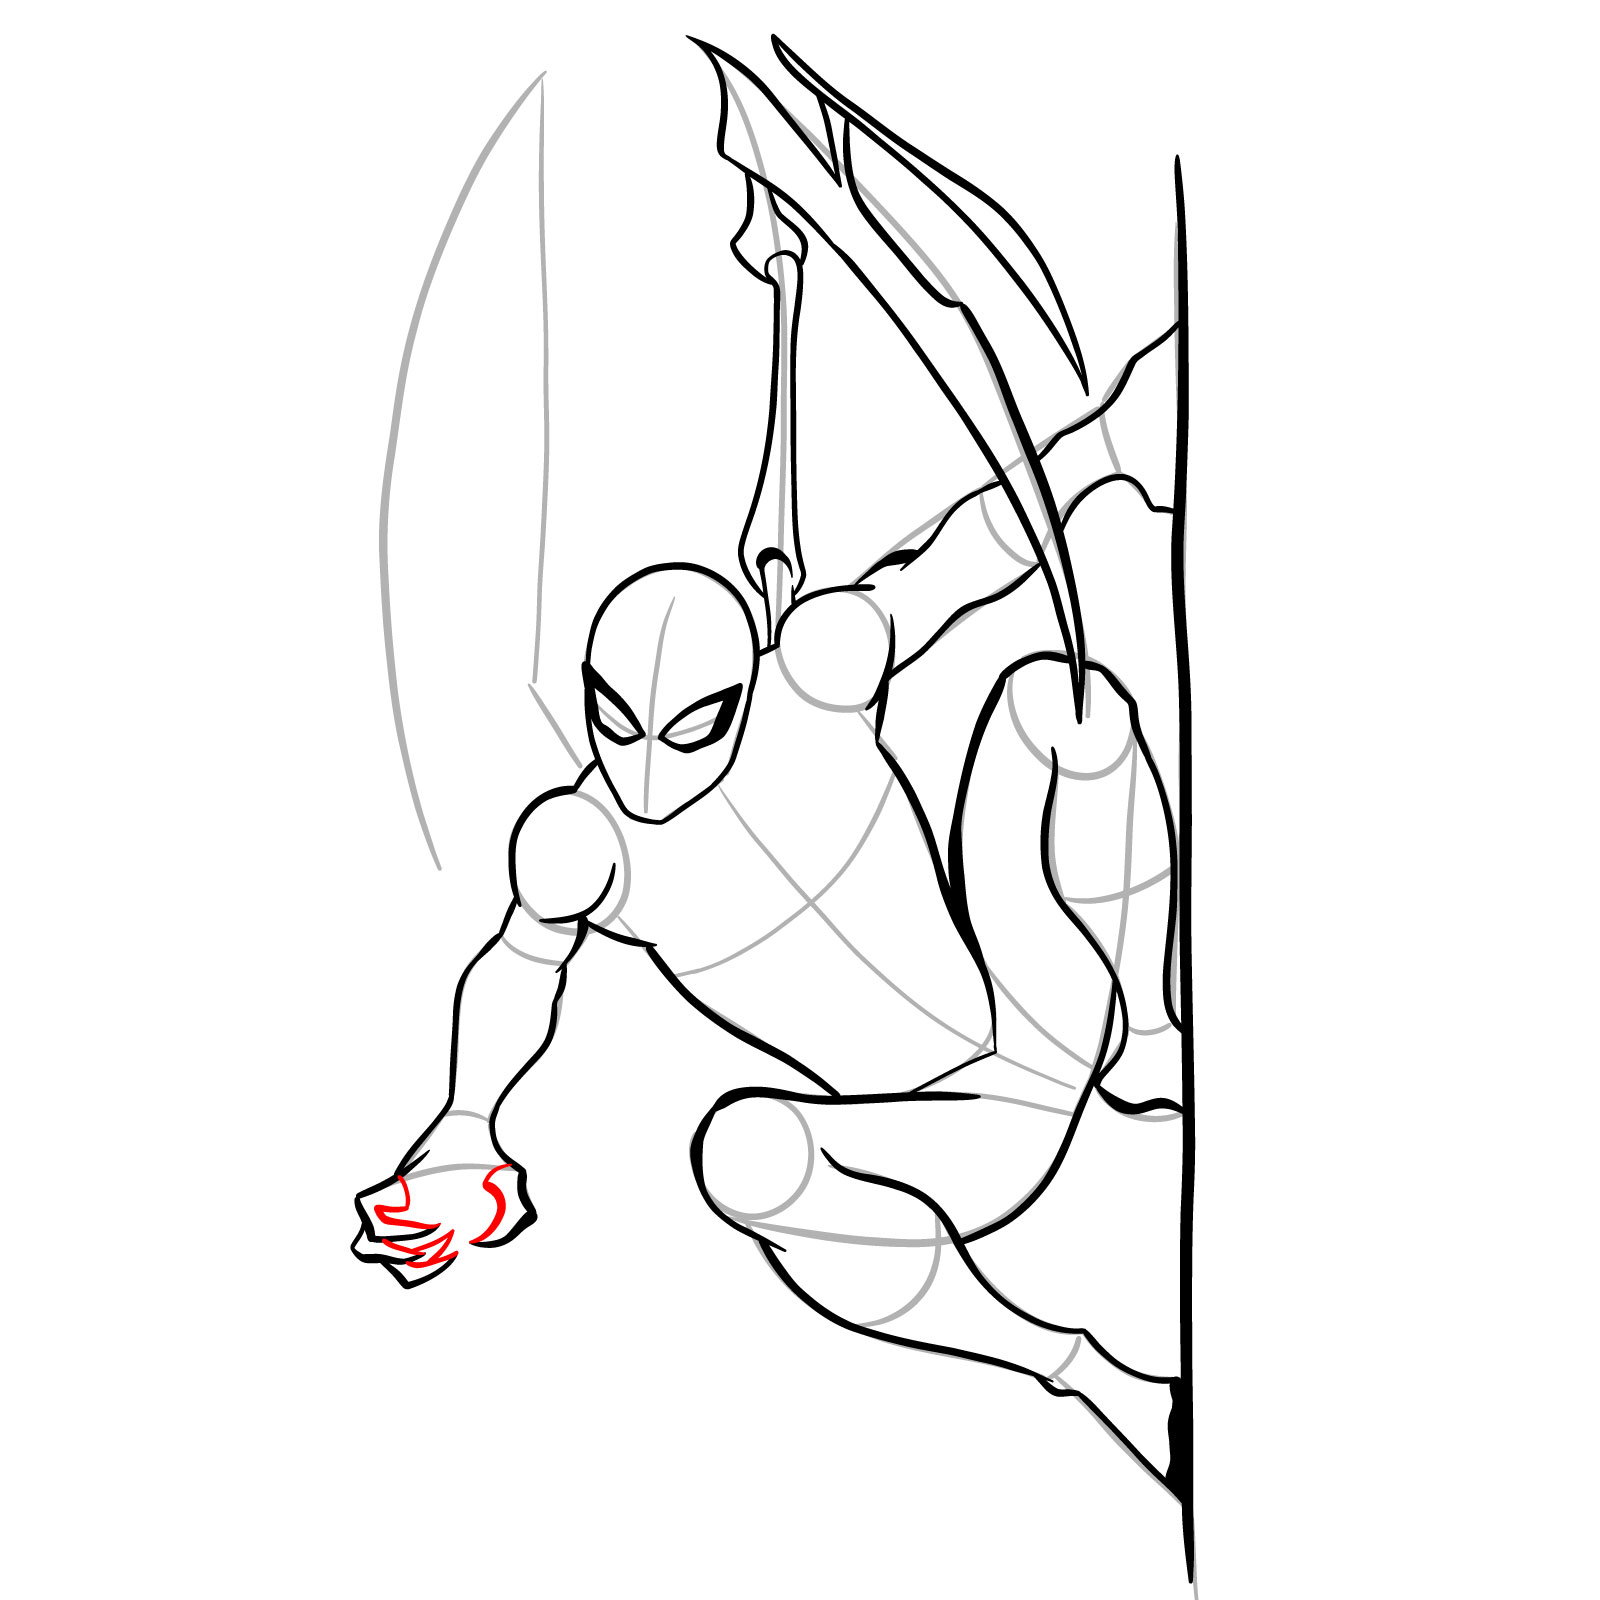 How to draw The Superior Spider-Man - step 25